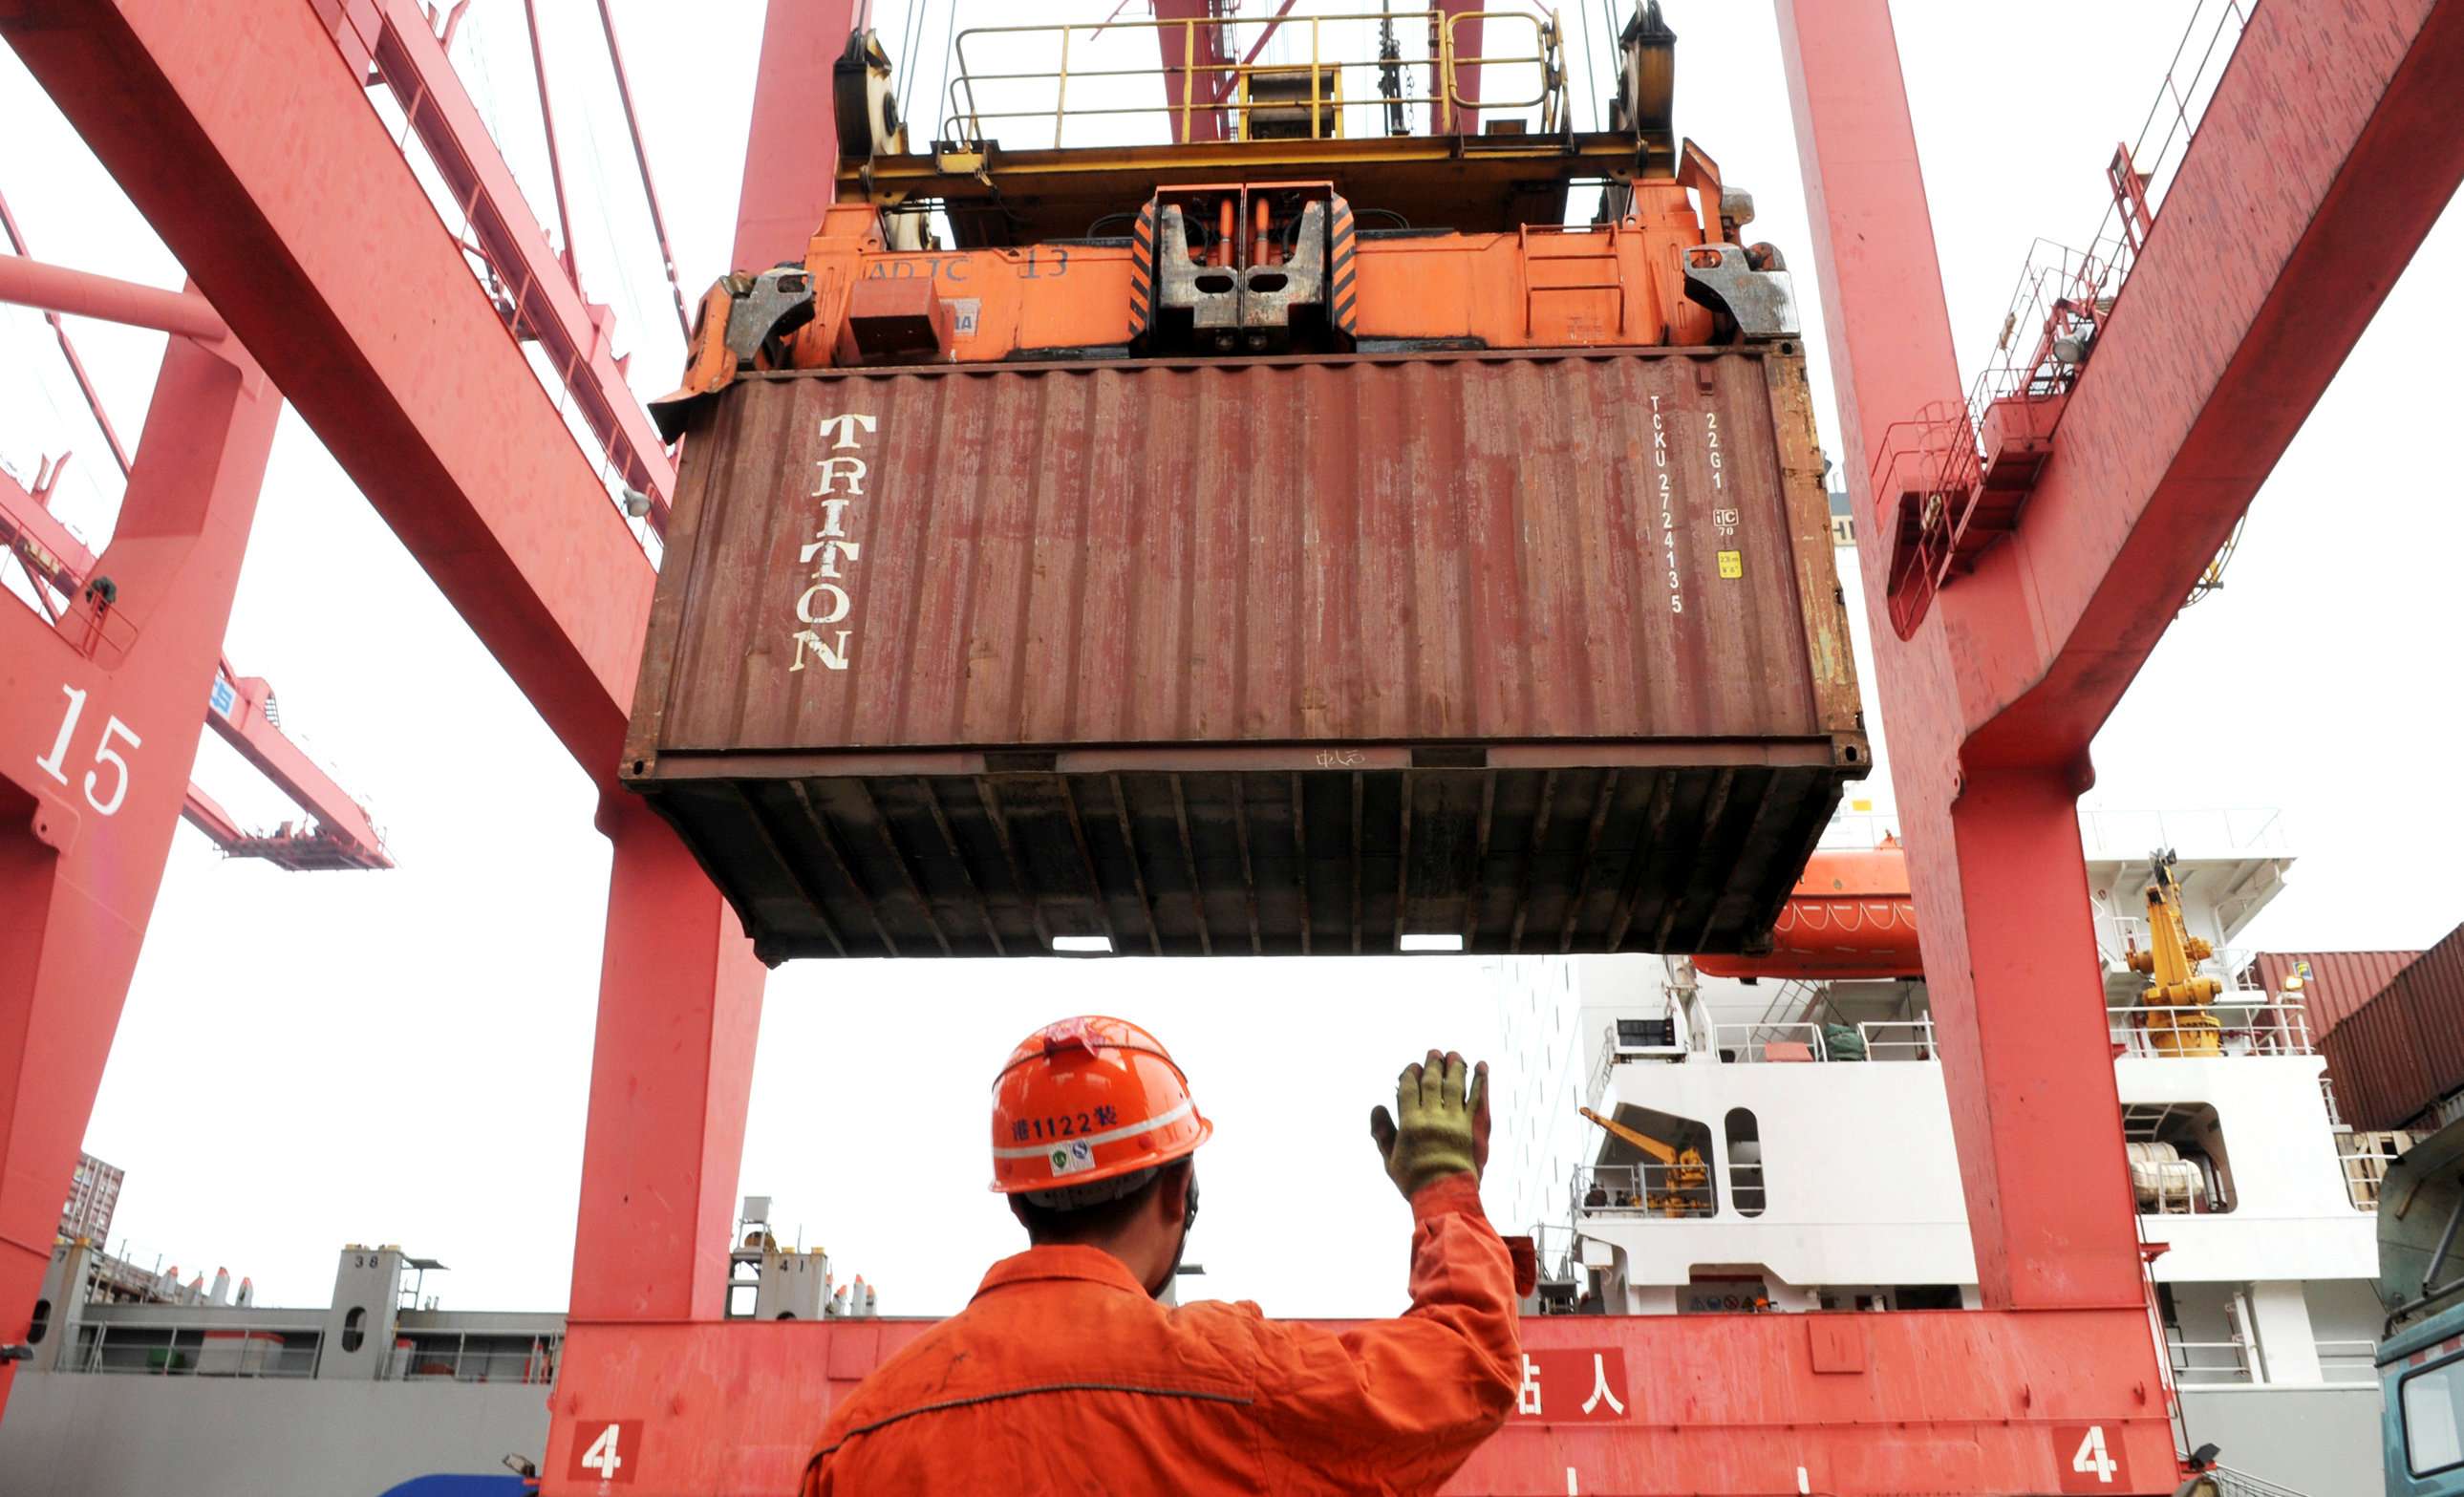 Putting cargo into containers was a key move in ushering in globalisation. Photo: Reuters